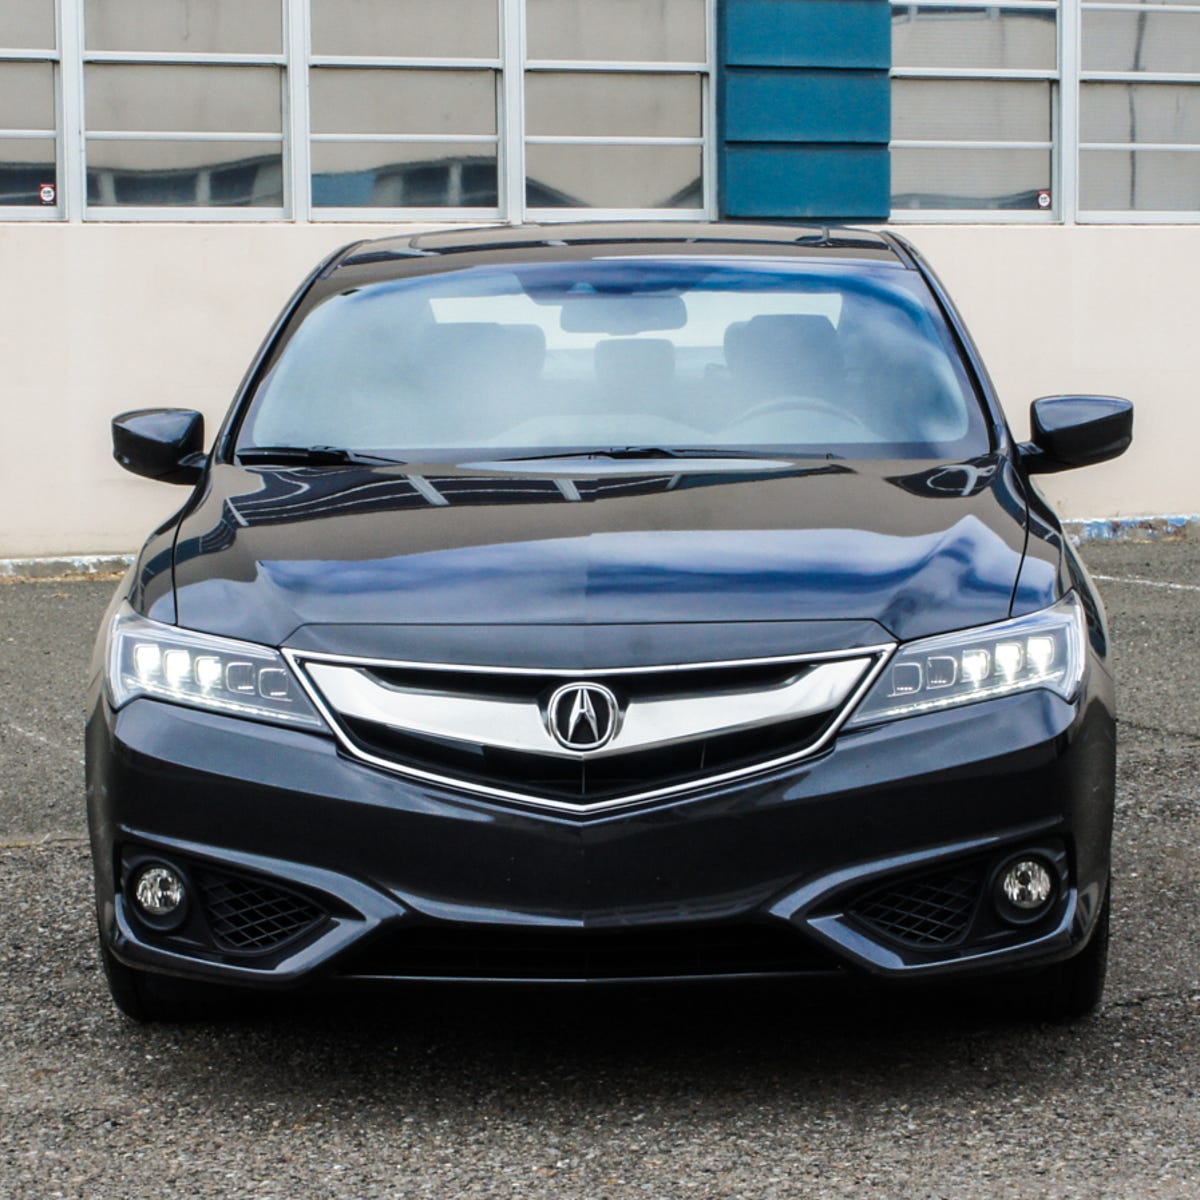 2016 Acura ILX review: Acura ILX doesn't live up to premium aspirations -  CNET